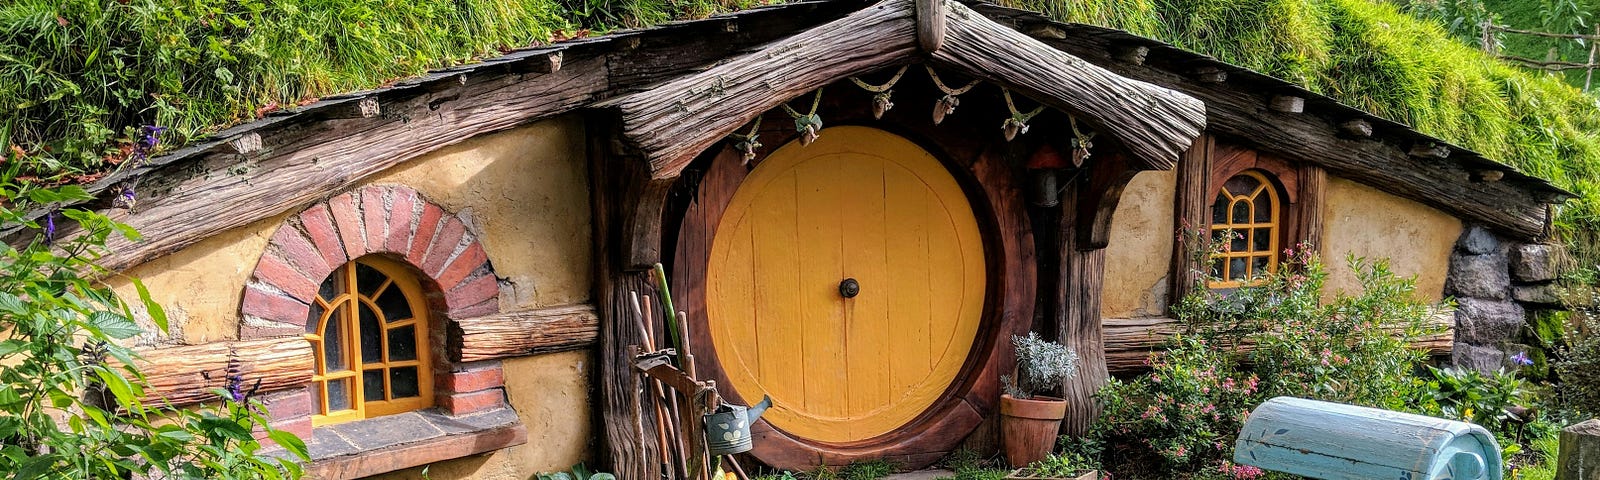 Photo of a hobbit home in the earth